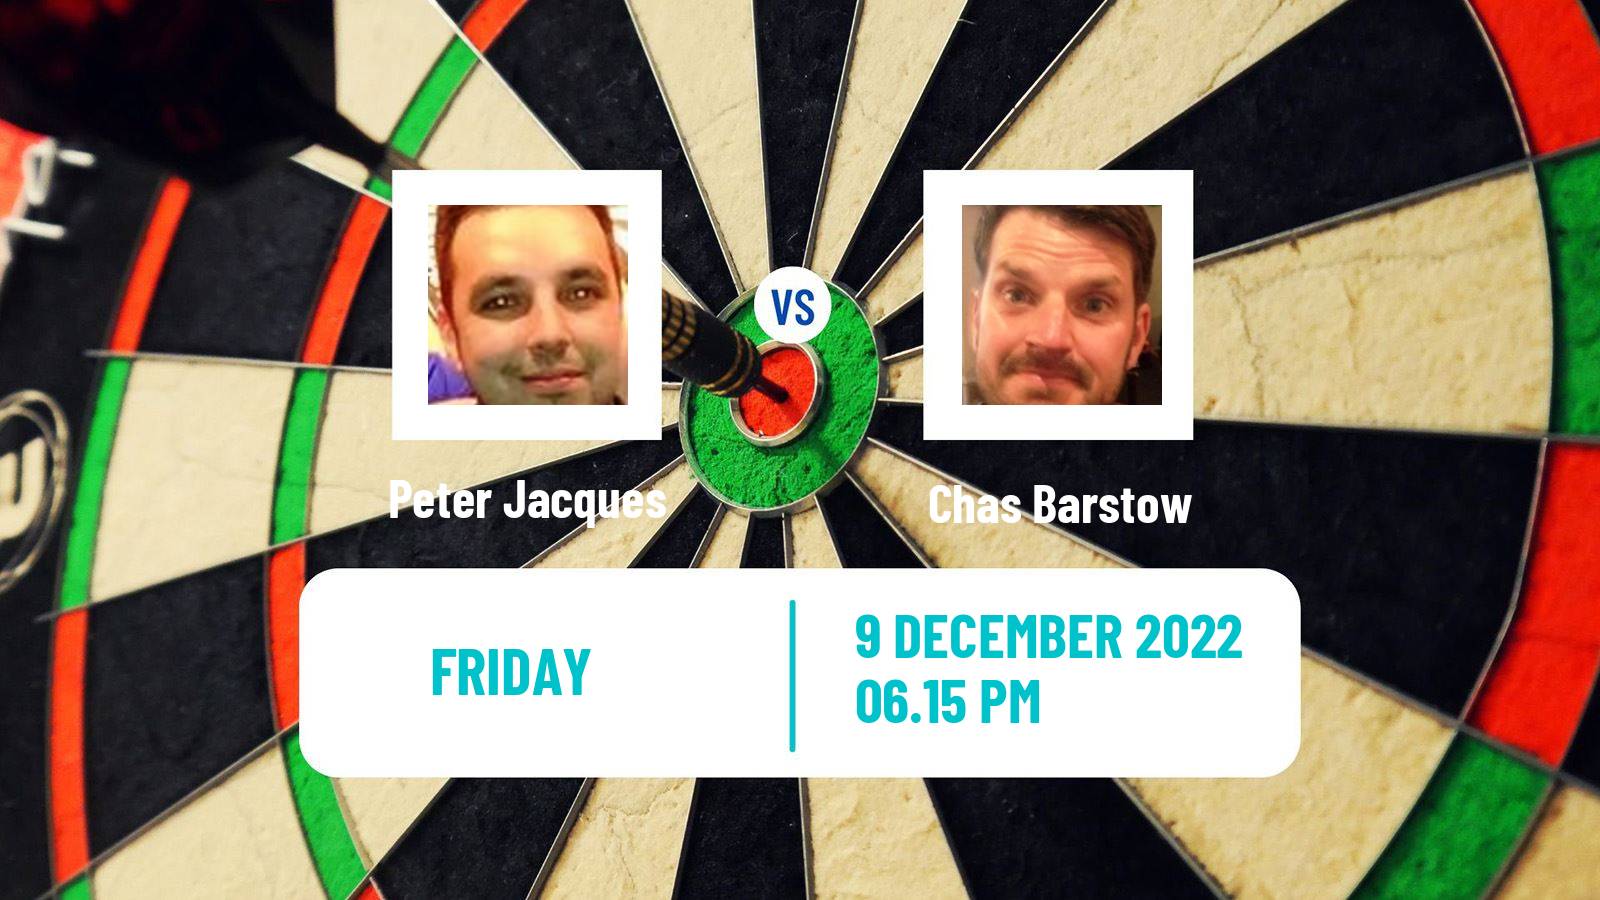 Darts Darts Peter Jacques - Chas Barstow